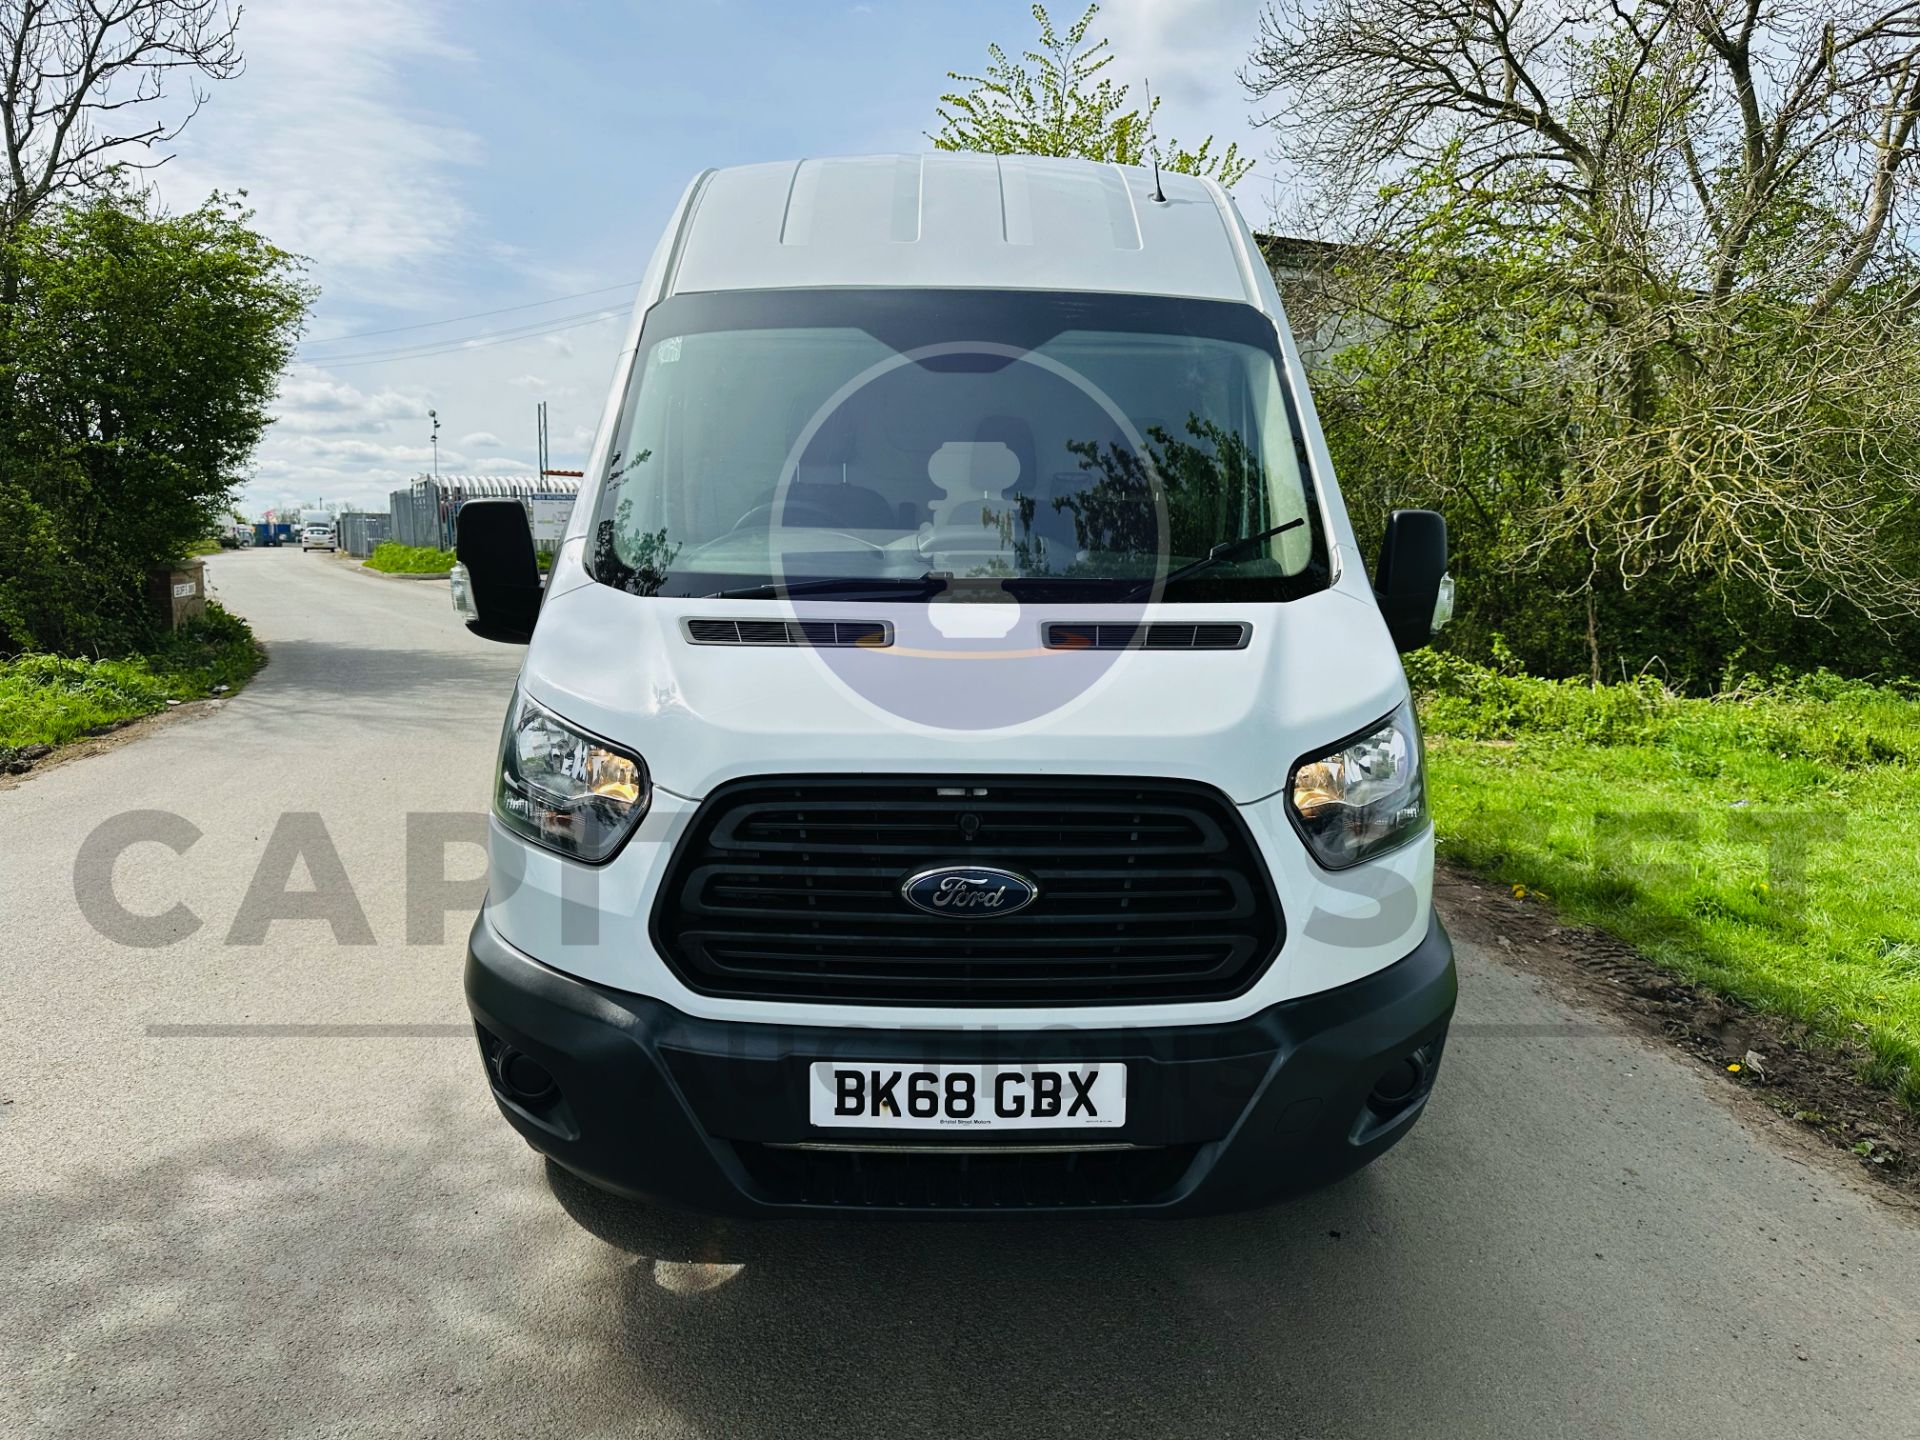 FORD TRANSIT 350 2.0 TDCI *ECOBLUE EDITION* LWB HIGH TOP - EURO 6 - 2019 MODEL - 1 OWNER - LOOK!!! - Image 3 of 32